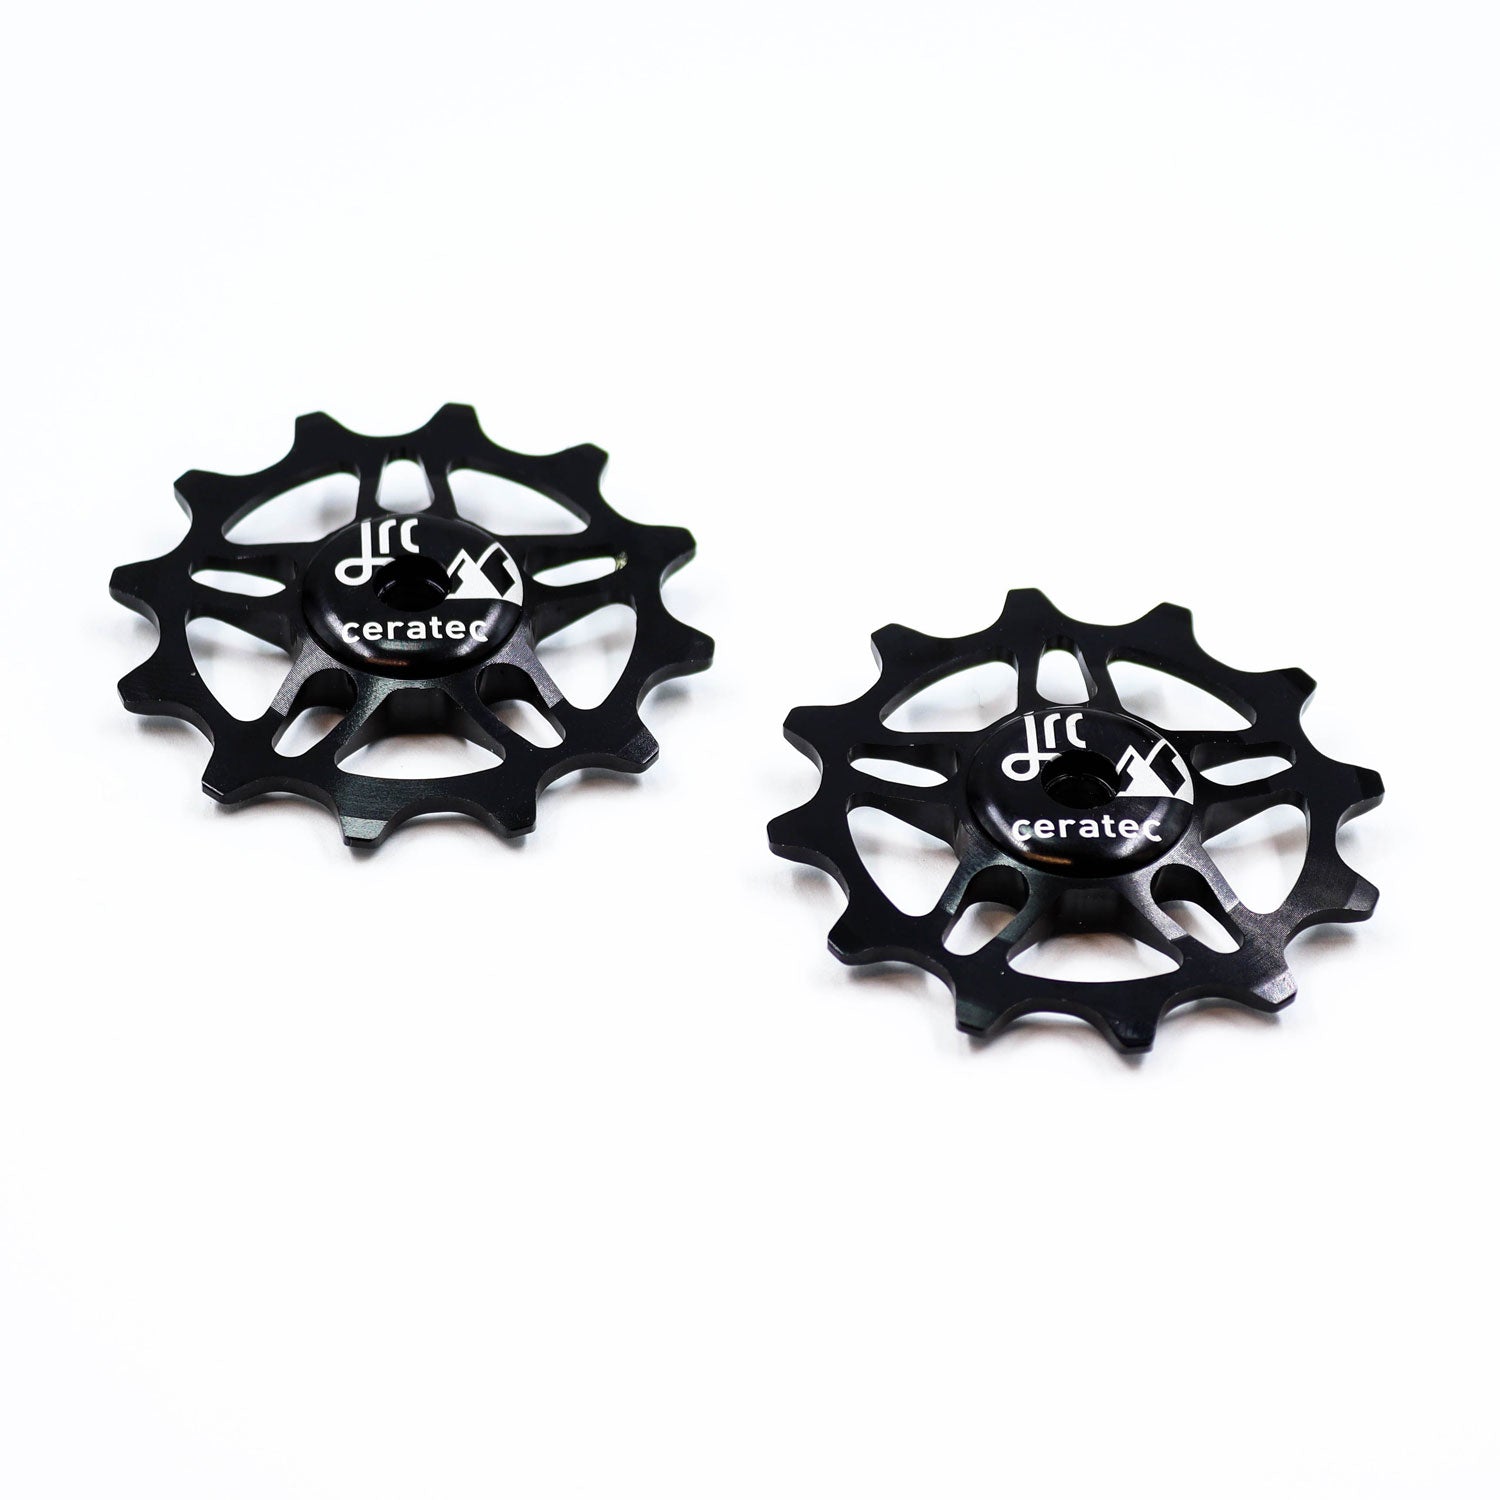 Black, lightweight aluminium pulley wheel set for bicycles, compatible with 12 tooth SRAM Rival/ Force/ Red/ AXS